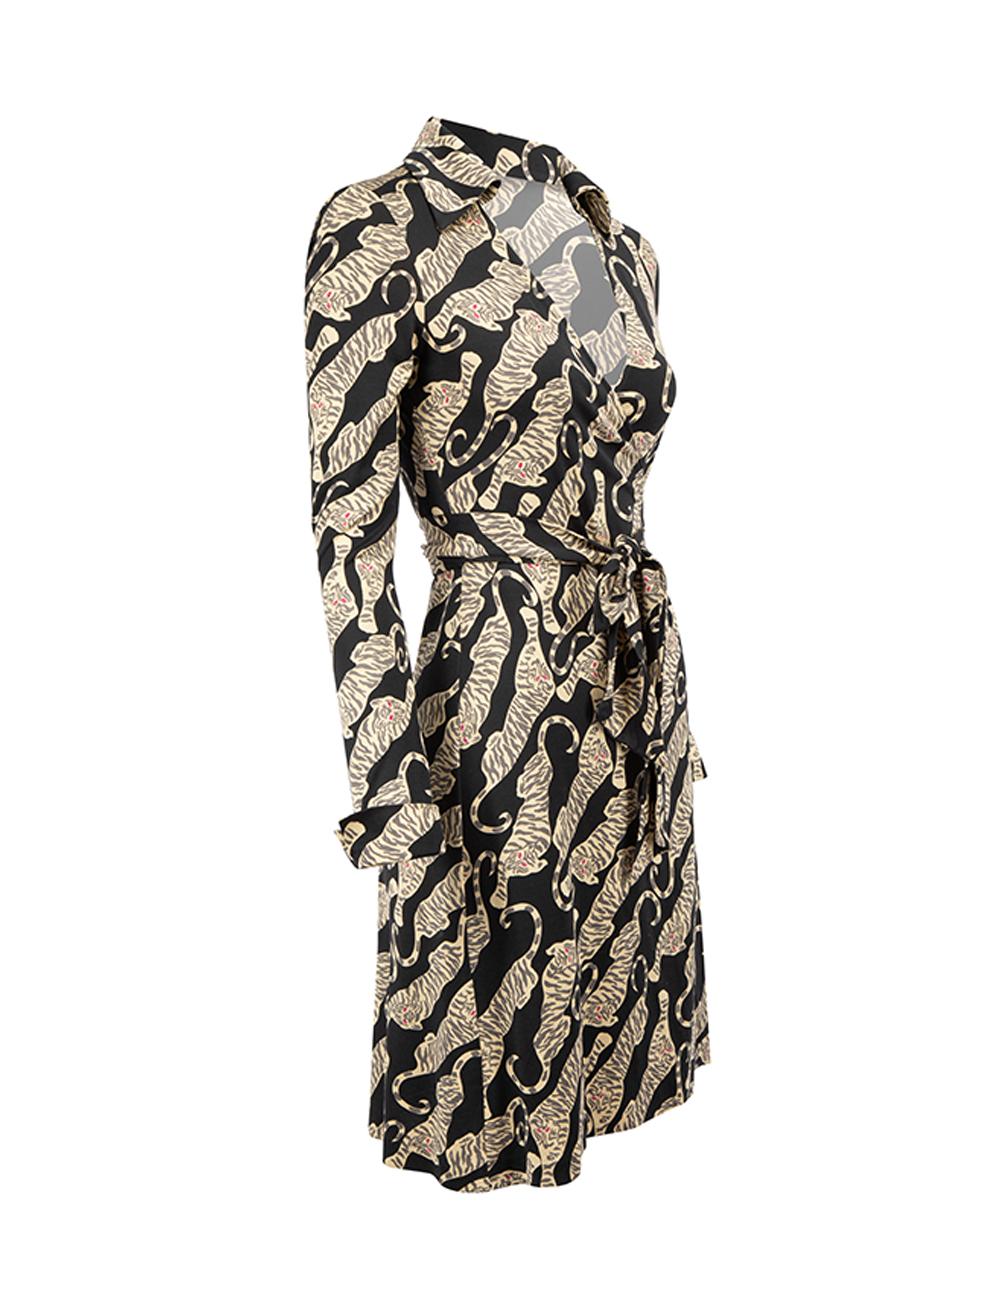 CONDITION is Very good. Hardly any visible wear to dress is evident on this used Diane Von Furstenberg designer resale item.



Details


Black 

Silk 

Wrap dress

Form fitting 

Long sleeve

Printed pattern 

V neck 

Winged collar 

Wrap